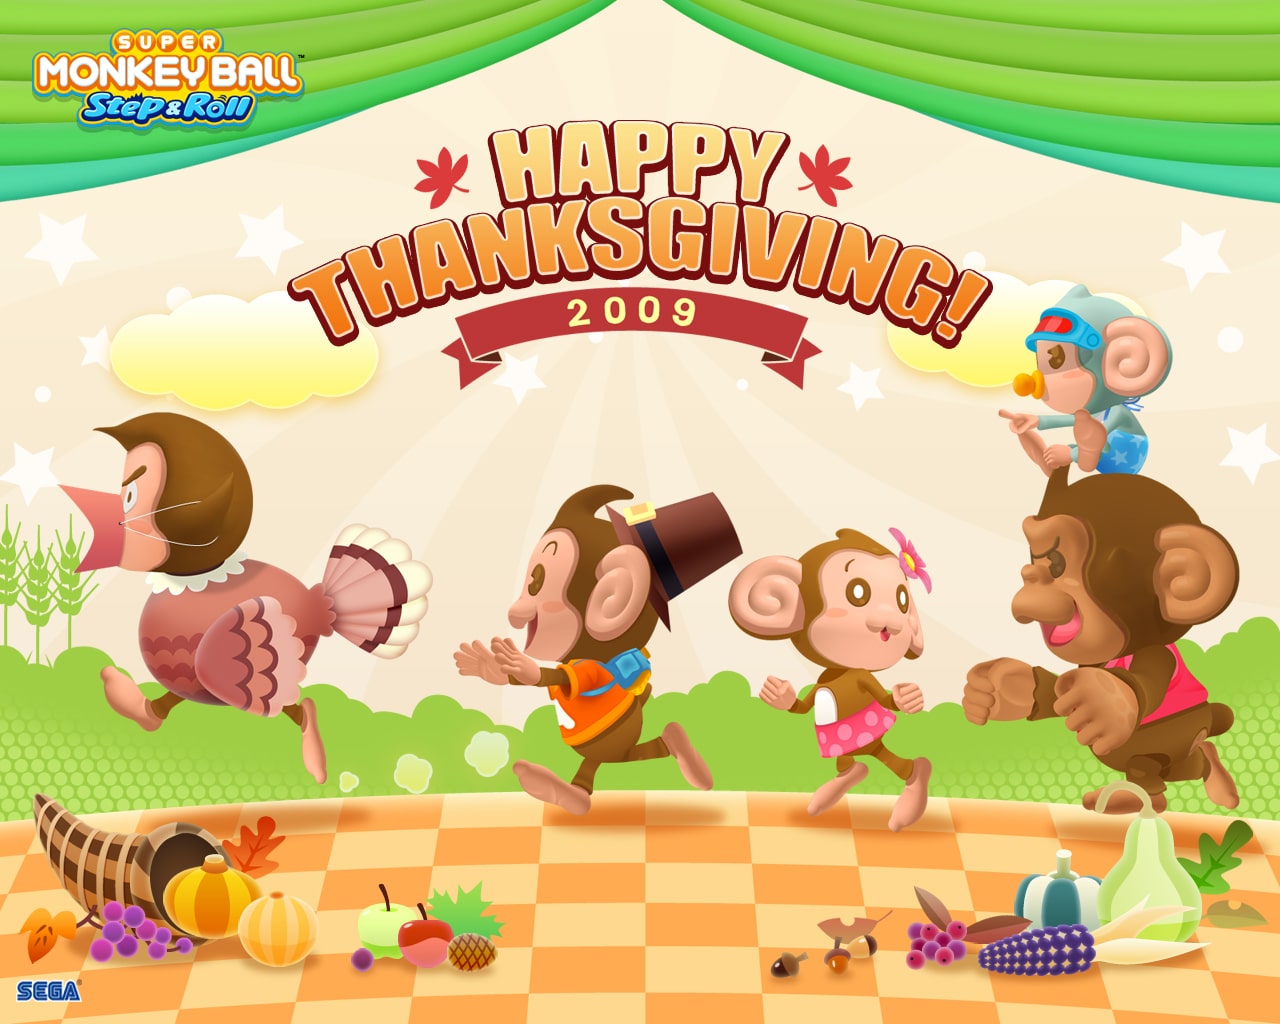 monkey ball step and roll download